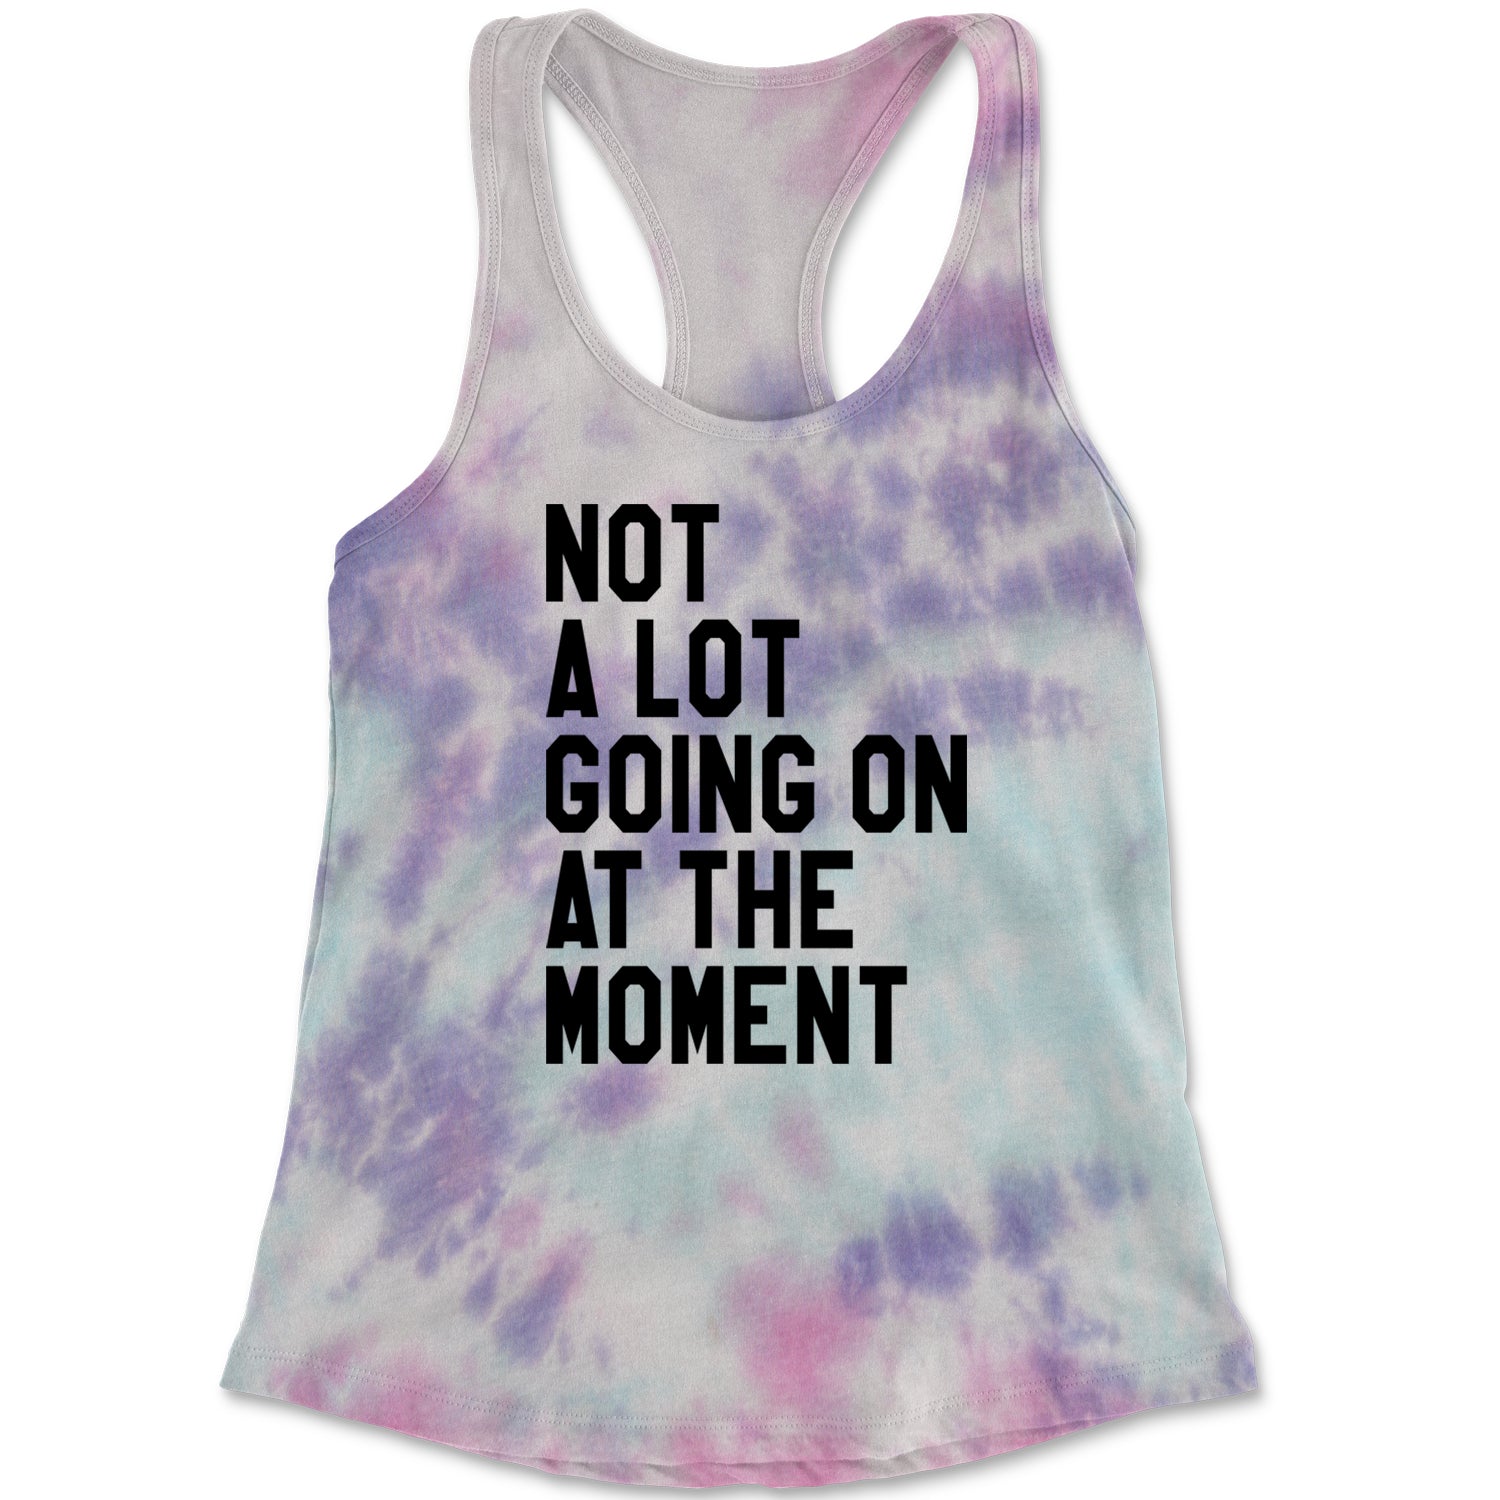 NOT A Lot Going On At The Moment Eras Feeling 22 Racerback Tank Top for Women